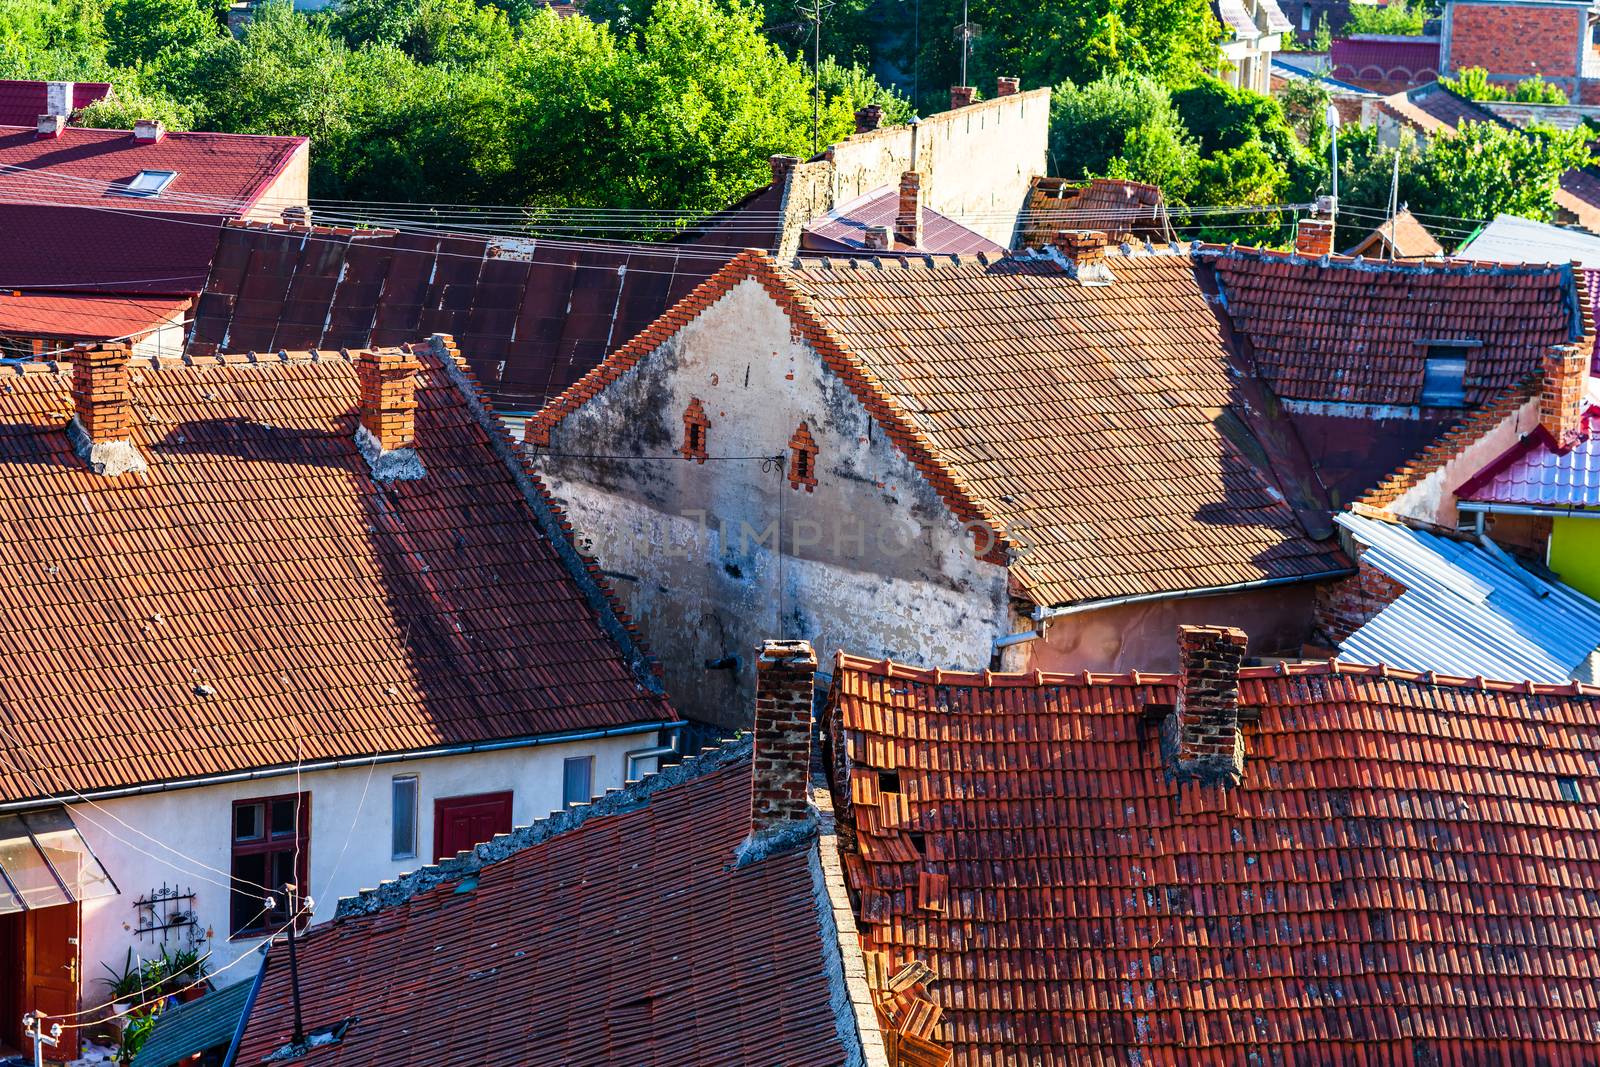 Overview of tile rooftops of old houses. Old buildings architect by vladispas